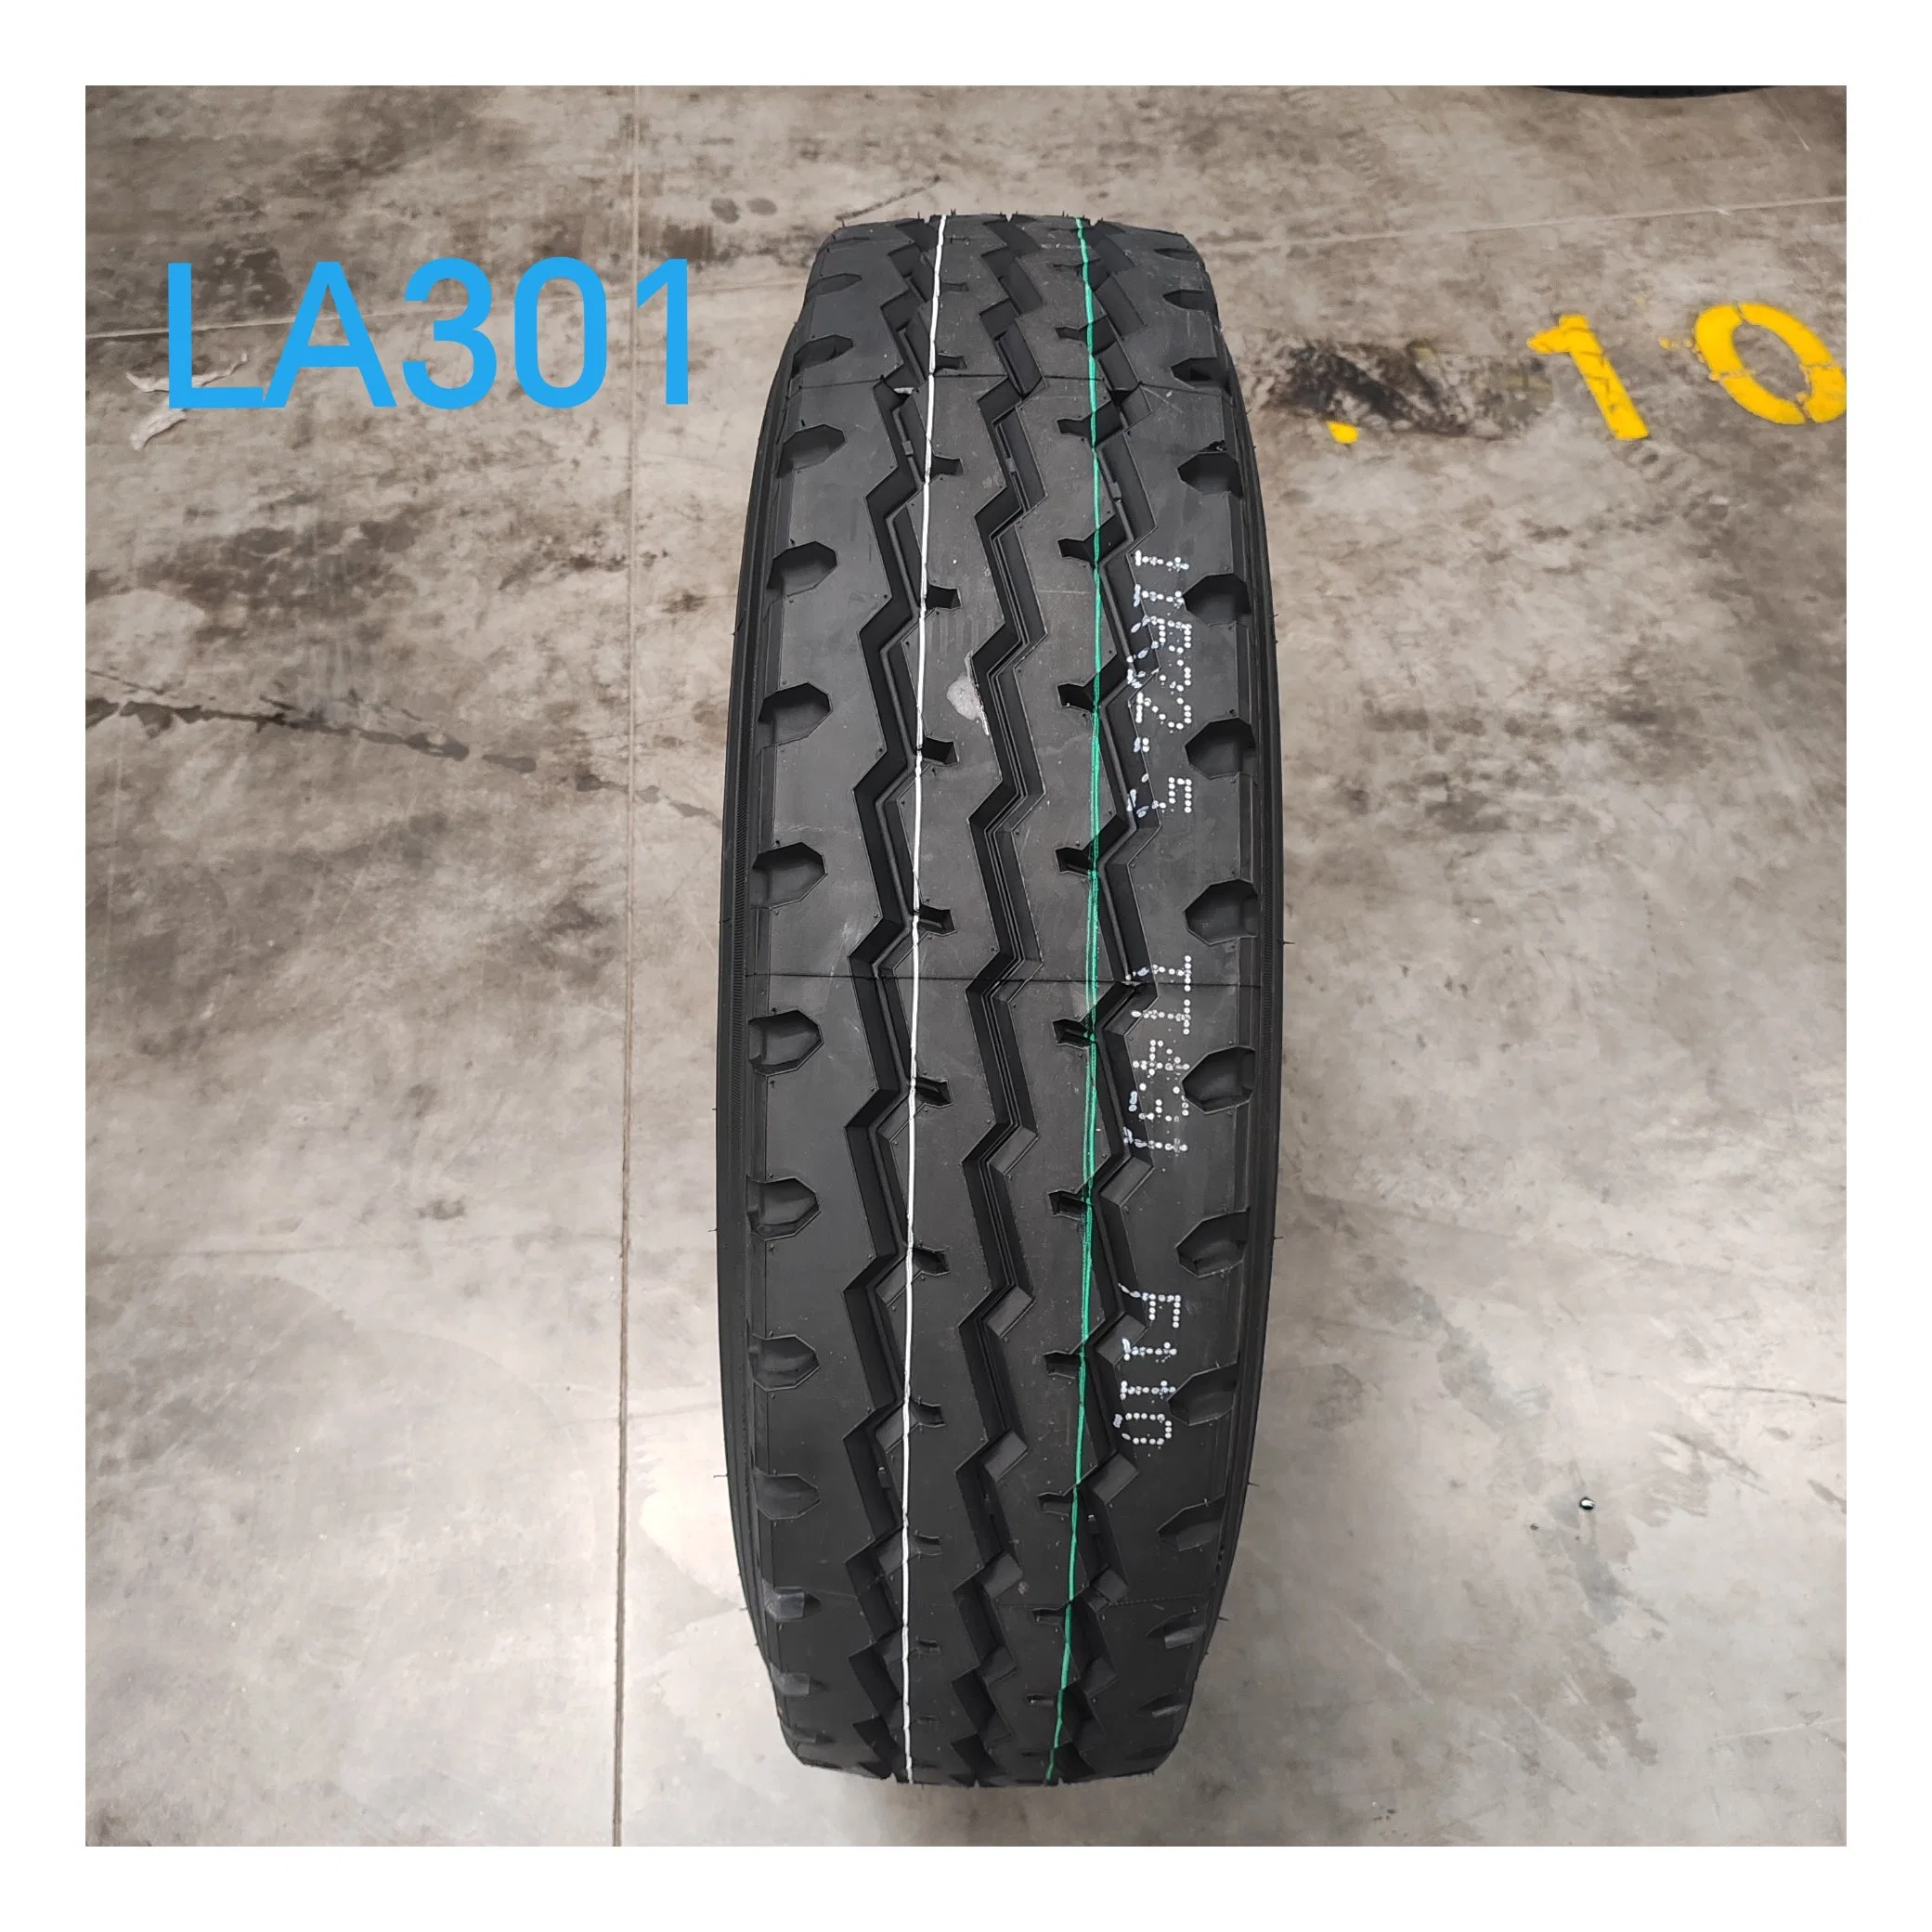 Lionshead High Quality 10.00r20 Radial Truck Tyre with Best Prices